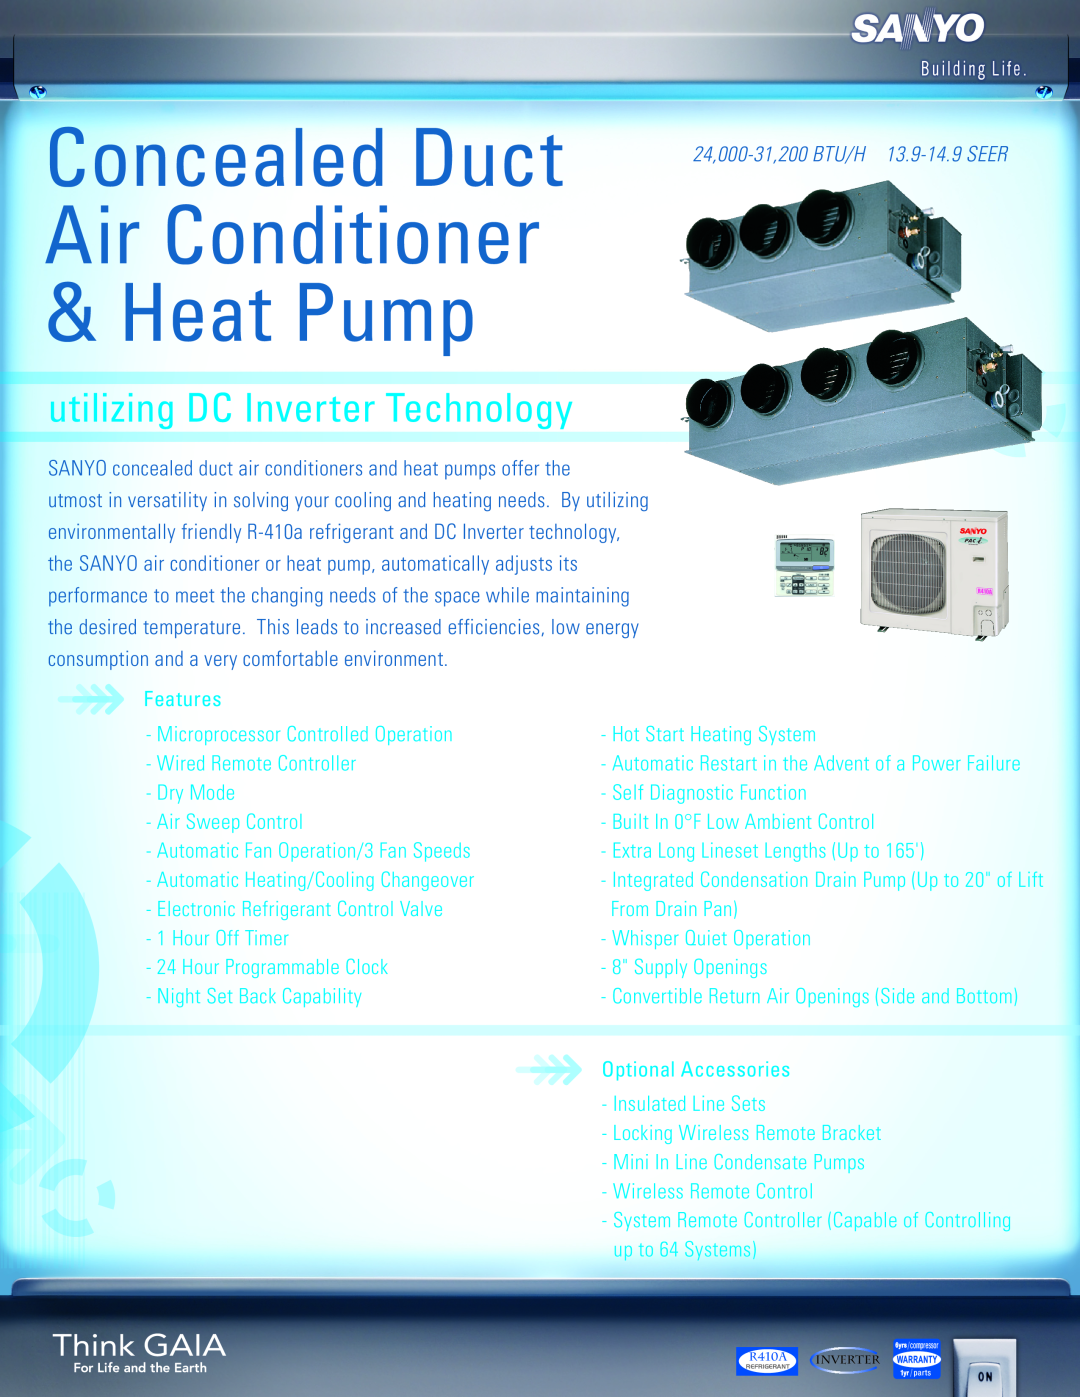 Sanyo 24, H 13.9-14.9 SEER, 200 BTU manual Concealed Duct Air Conditioner & Heat Pump, utilizing DC Inverter Technology 